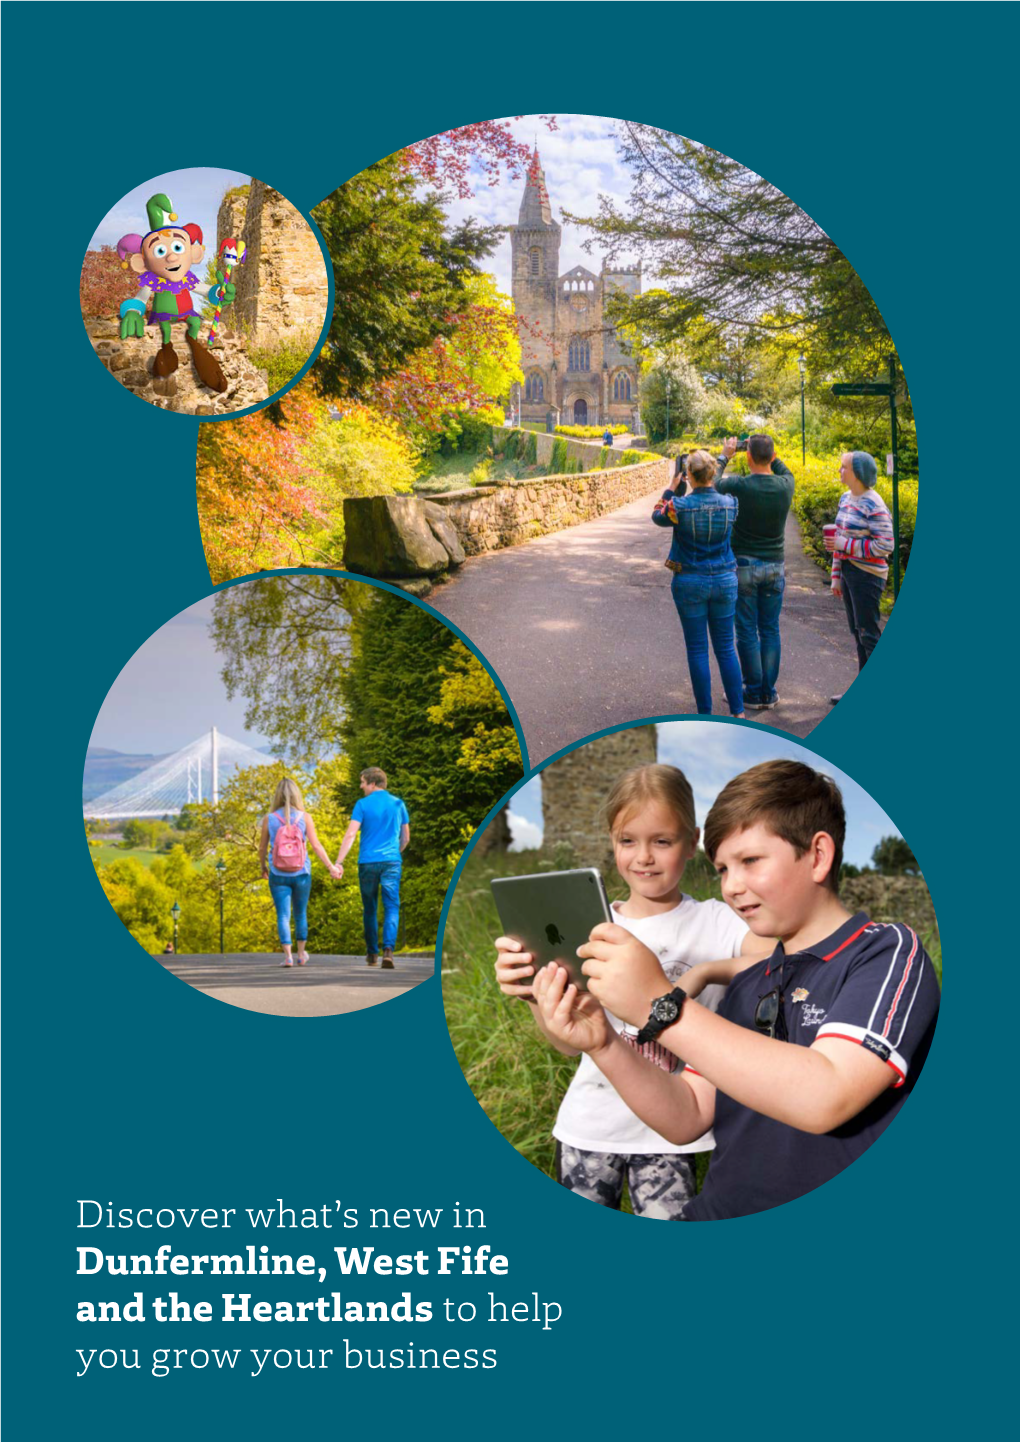 Discover What's New in Dunfermline, West Fife and the Heartlands To